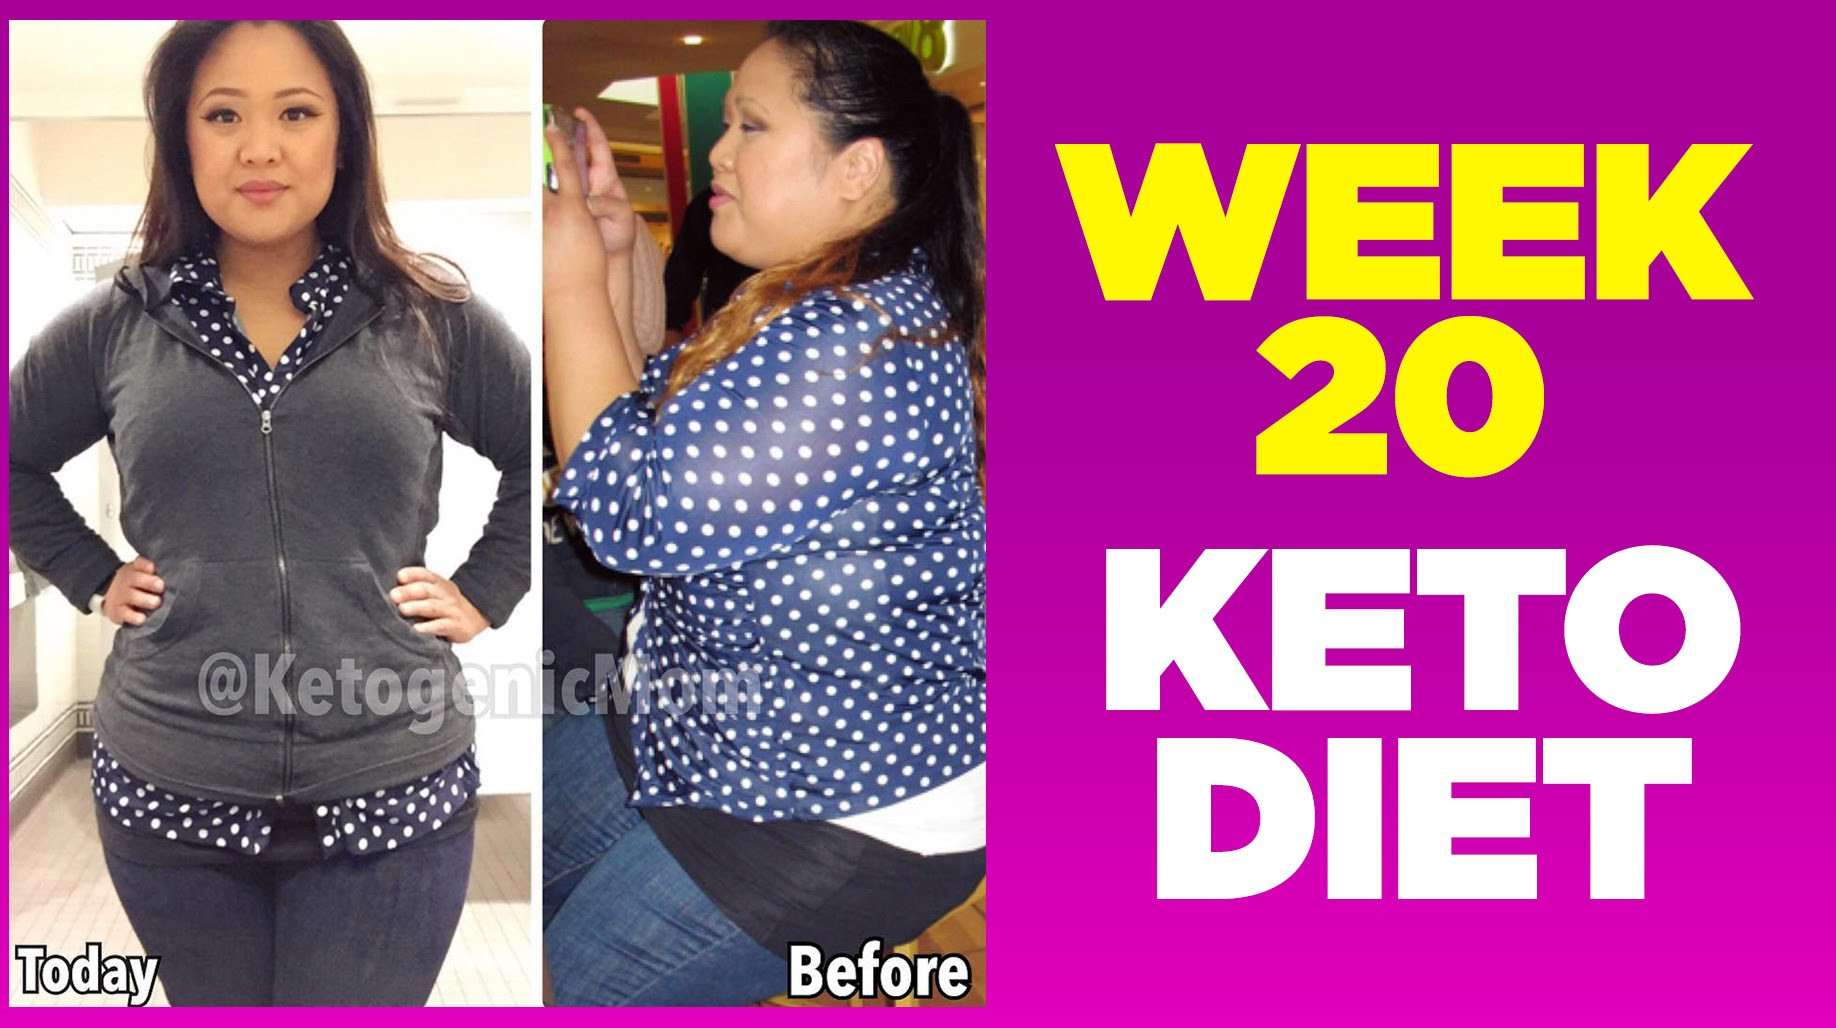 Keto Diet Results 12 Weeks
 Ketogenic Diet Week 20 Before and After